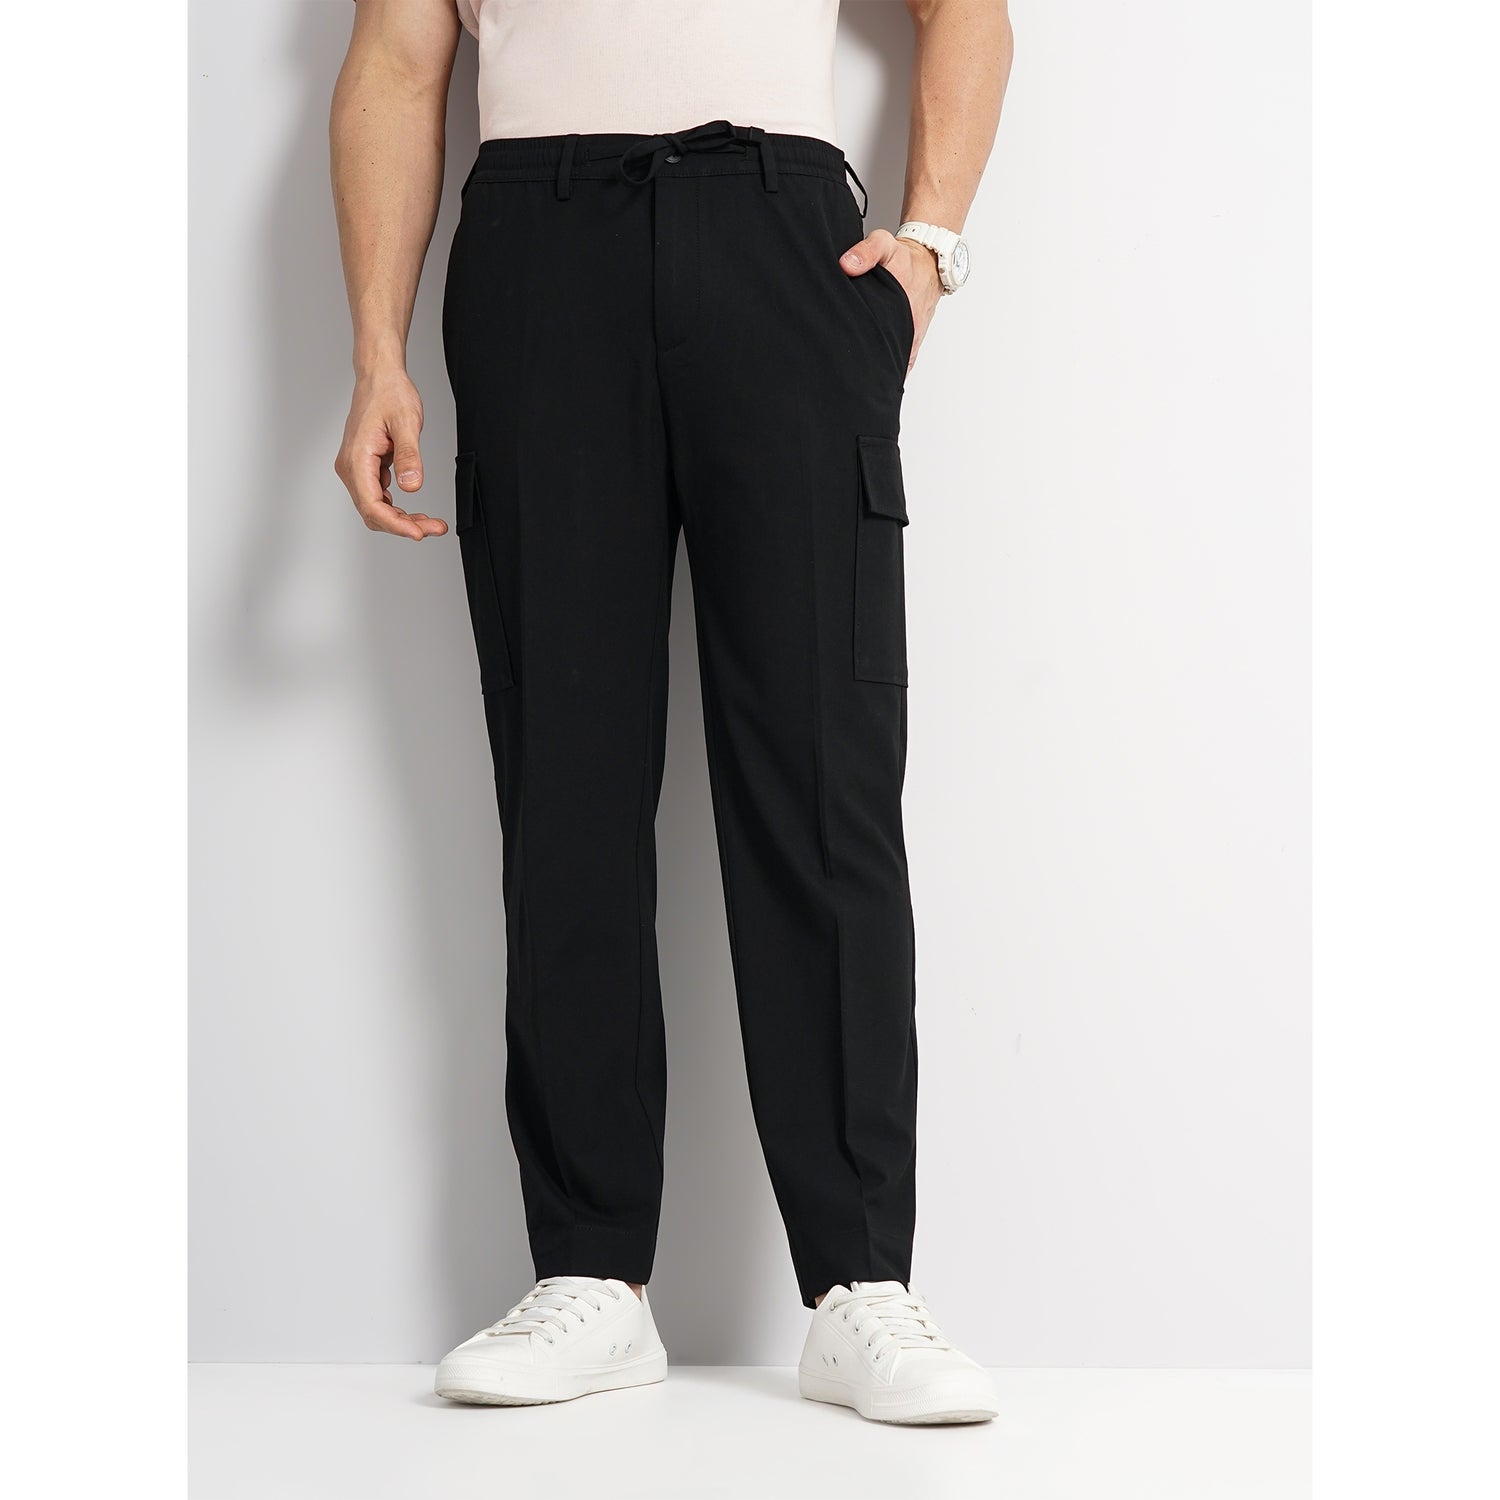 Men Black Solid Straight Fit Polyester Cargo Trousers (GOTRAVEL)